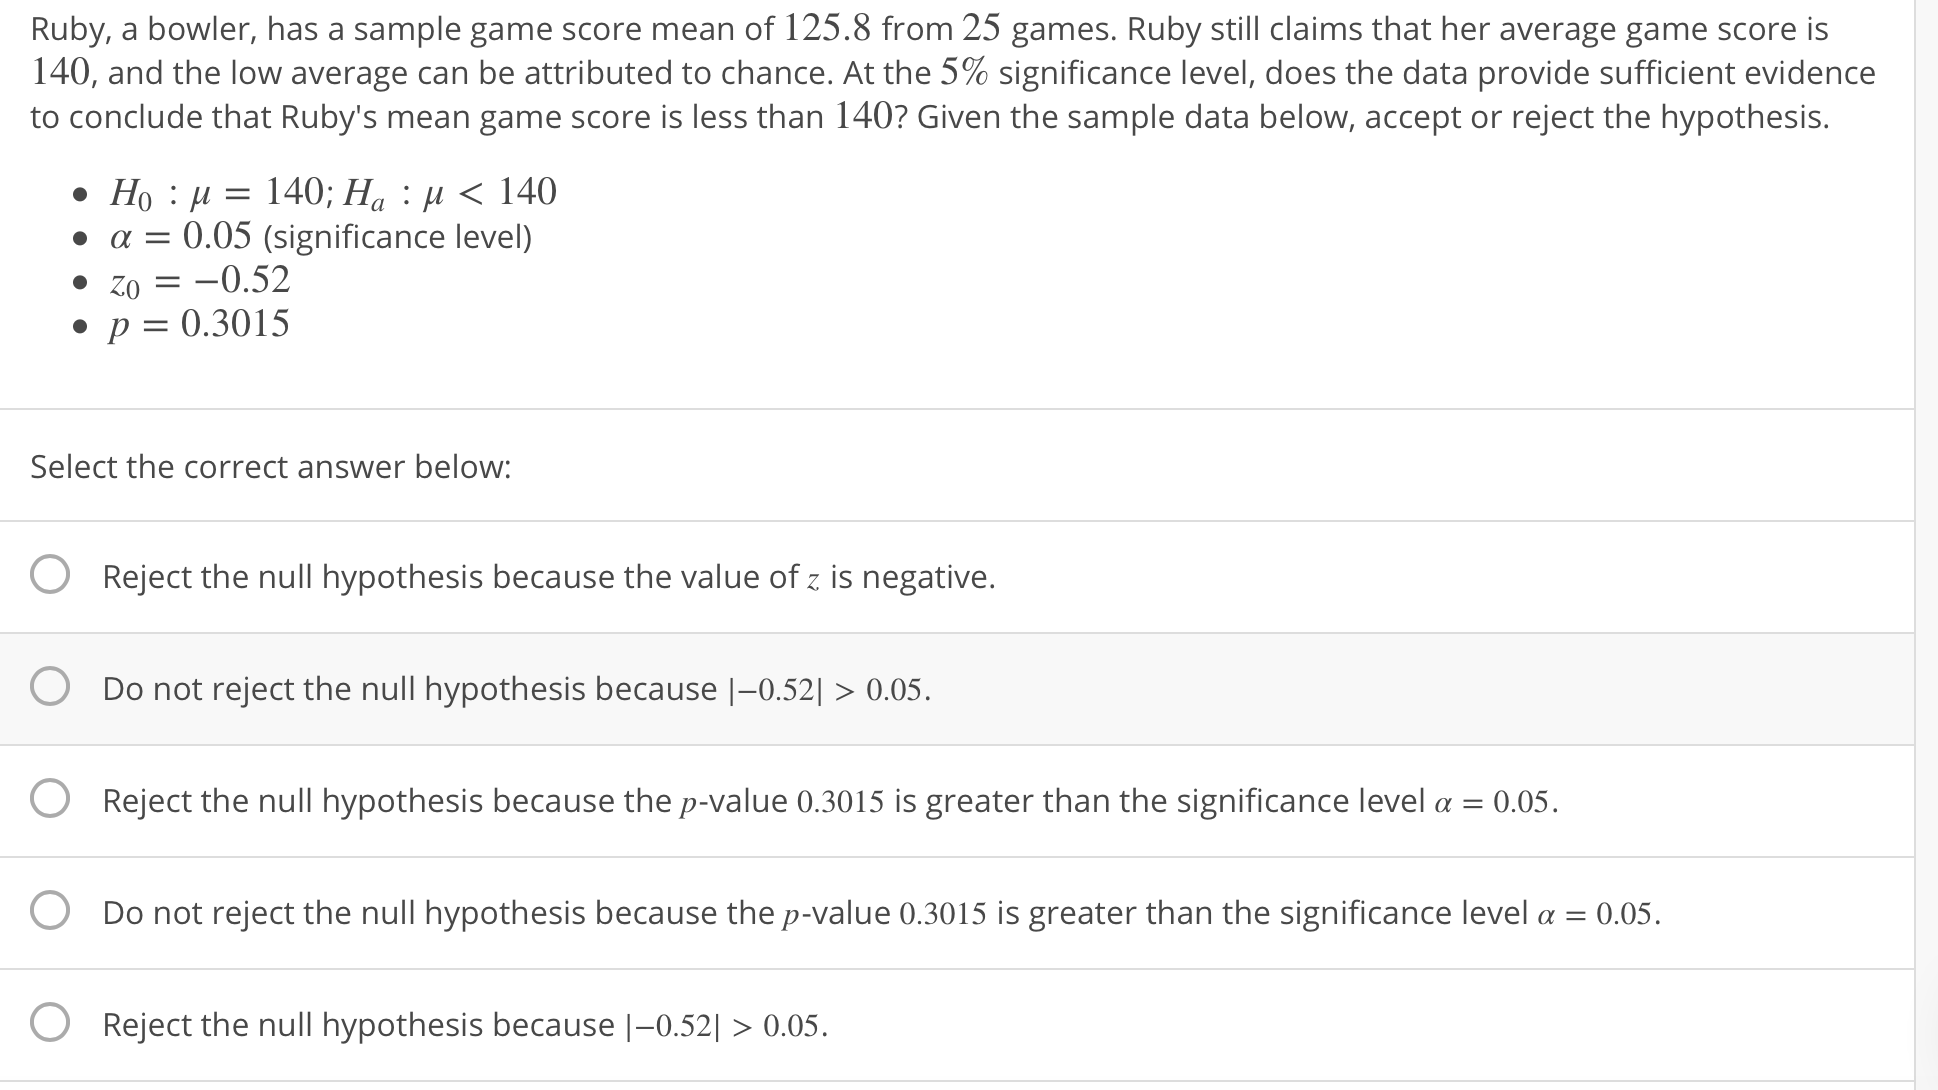 Ruby, a bowler, has a sample game score mean of 125.8 from 25 games. Ruby still claims that her average game score is
140, and the low average can be attributed to chance. At the 5% significance level, does the data provide sufficient evidence
to conclude that Ruby's mean game score is less than 140? Given the sample data below, accept or reject the hypothesis.
a 0.05 (significance level)
20-0.52
P 0.3015
Select the correct answer below:
O Reject the null hypothesis because the value of z is negative.
O Do not reject the null hypothesis because |-0.52| 0.05
O Reject the null hypothesis because the p-value 0.3015 is greater than the significance level a 0.05
O Do not reject the null hypothesis because the p-value 0.3015 is greater than the significance level a 0.05
O Reject the null hypothesis because |-0.521 > 0.05.
